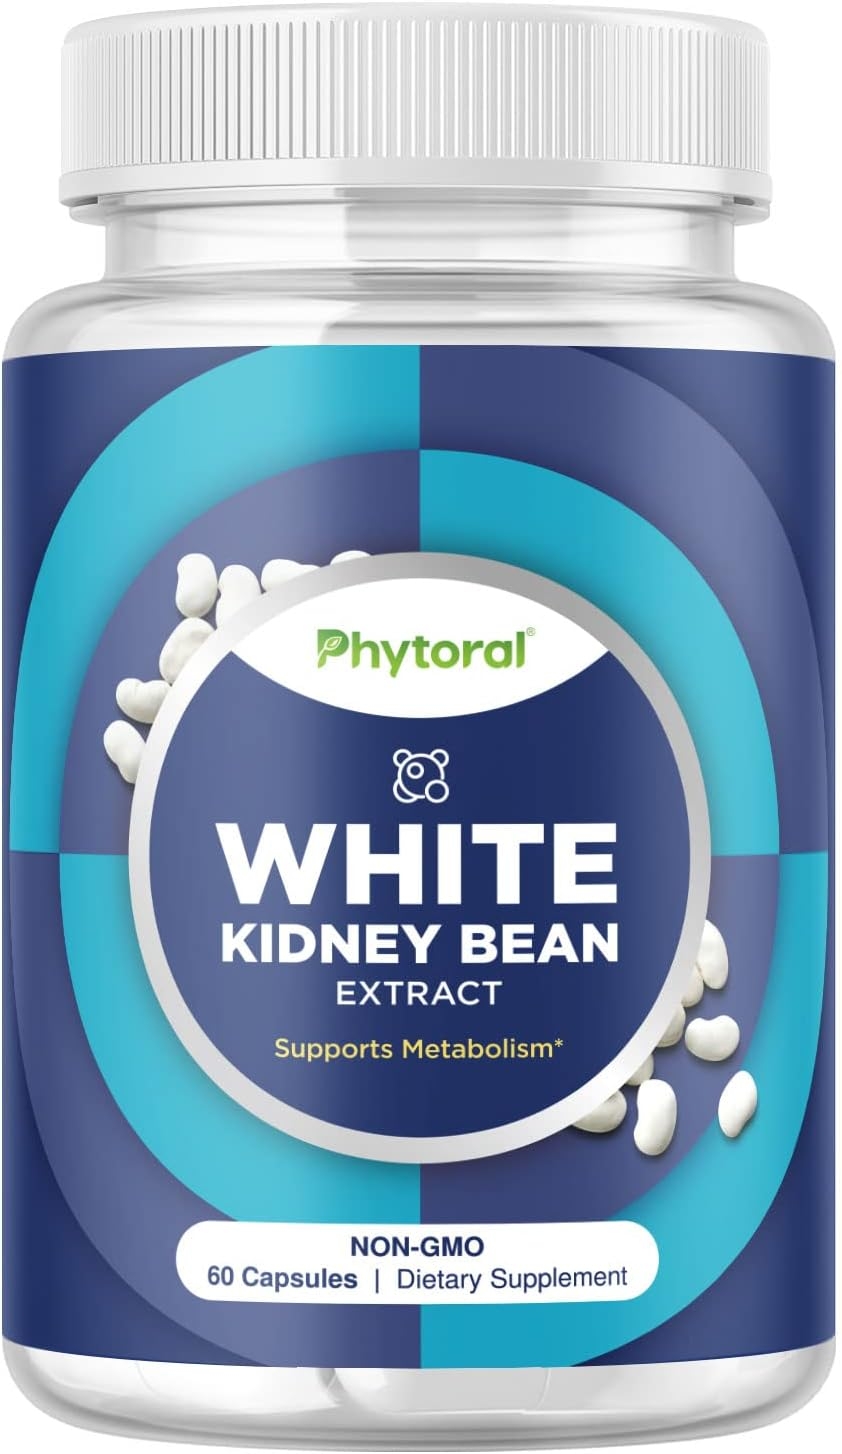 White Kidney Bean Energy Supplements - Pure White Kidney Bean Extract Pill with Amylase Enzyme and Natural Energy Pills for Fatigue - Potent and Natural Vegetarian Supplements for Women and Men